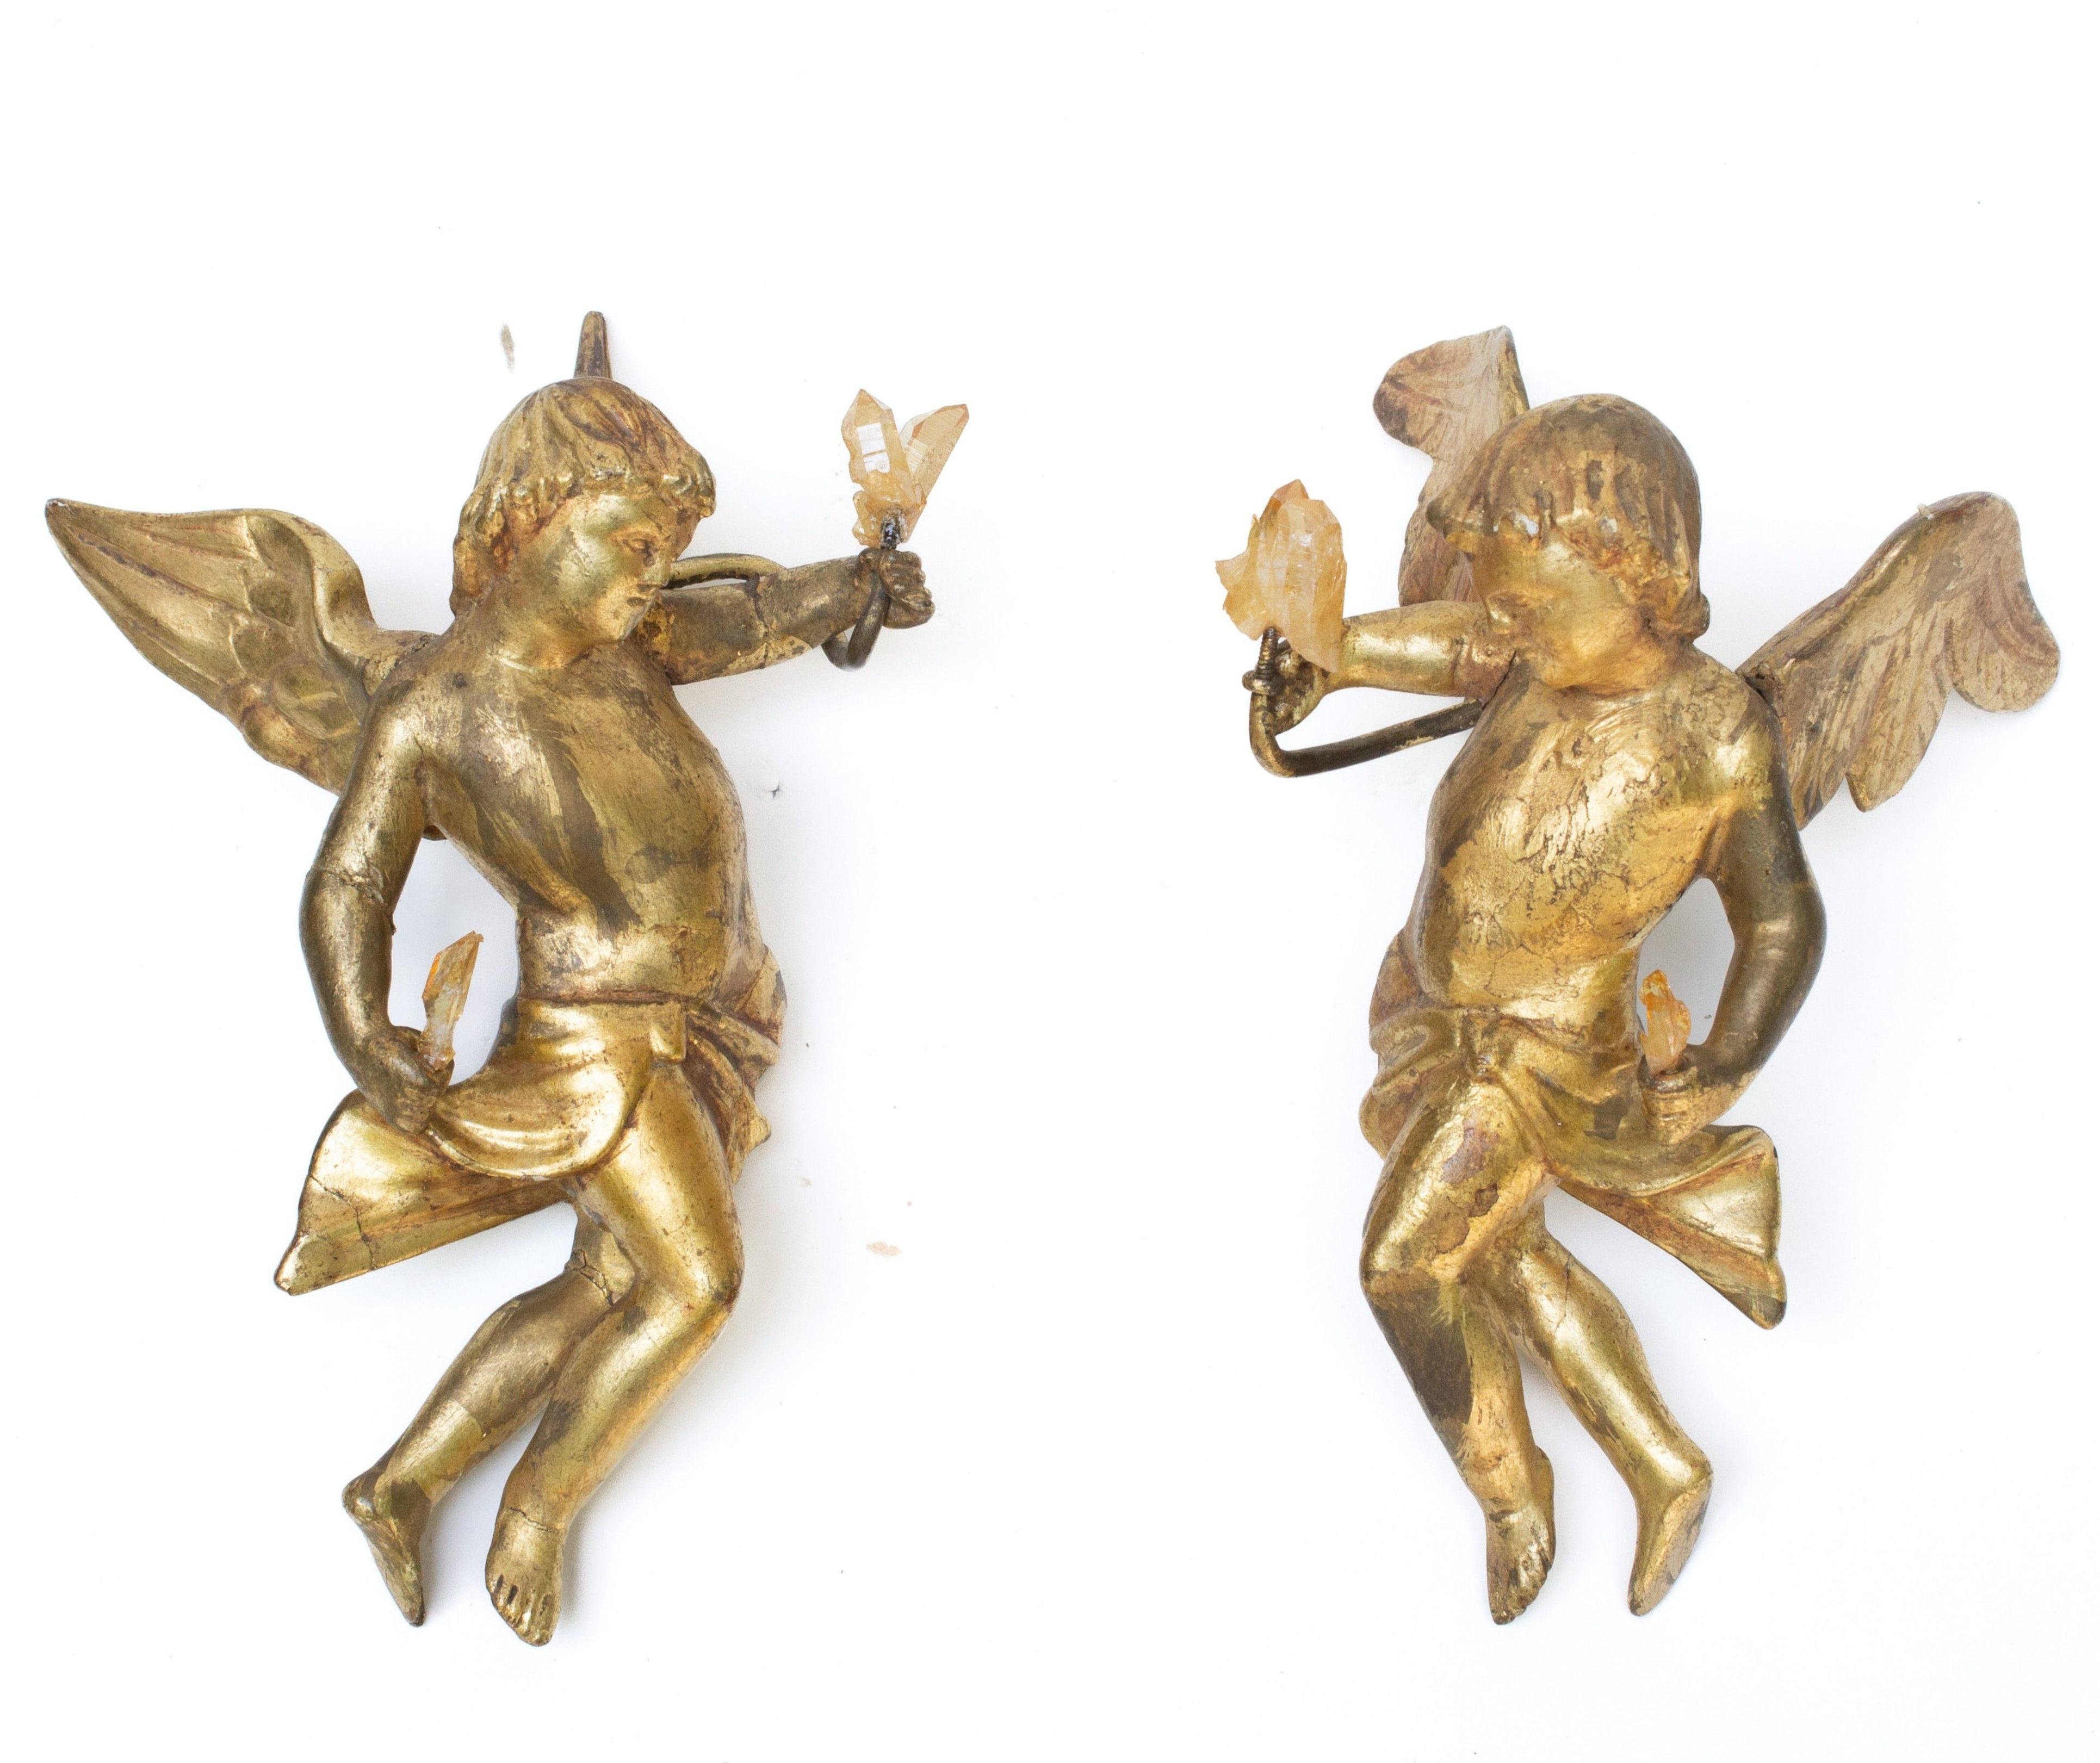 Pair of 18th century Italian hand-carved gold leaf angels with golden quartz crystals. The sculptural pair have the original metal wall hangers to be hung on the wall. The hand-carved angels were once part of a heavenly, angelic depiction or